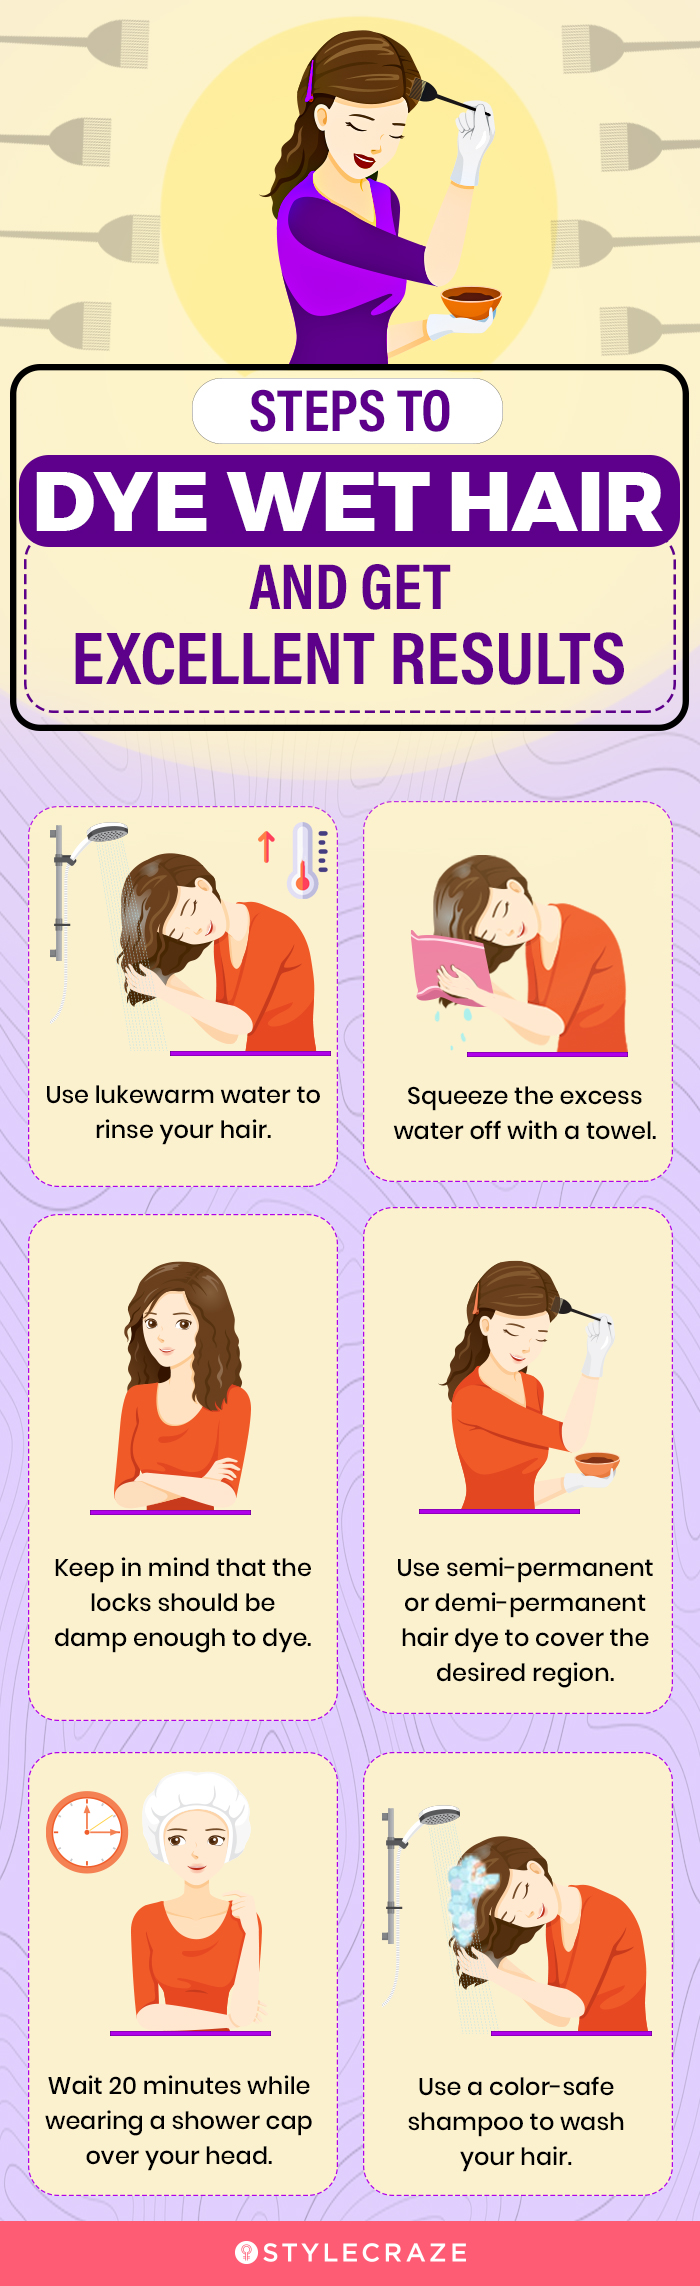 steps to dye wet hair and get excellent results (infographic)